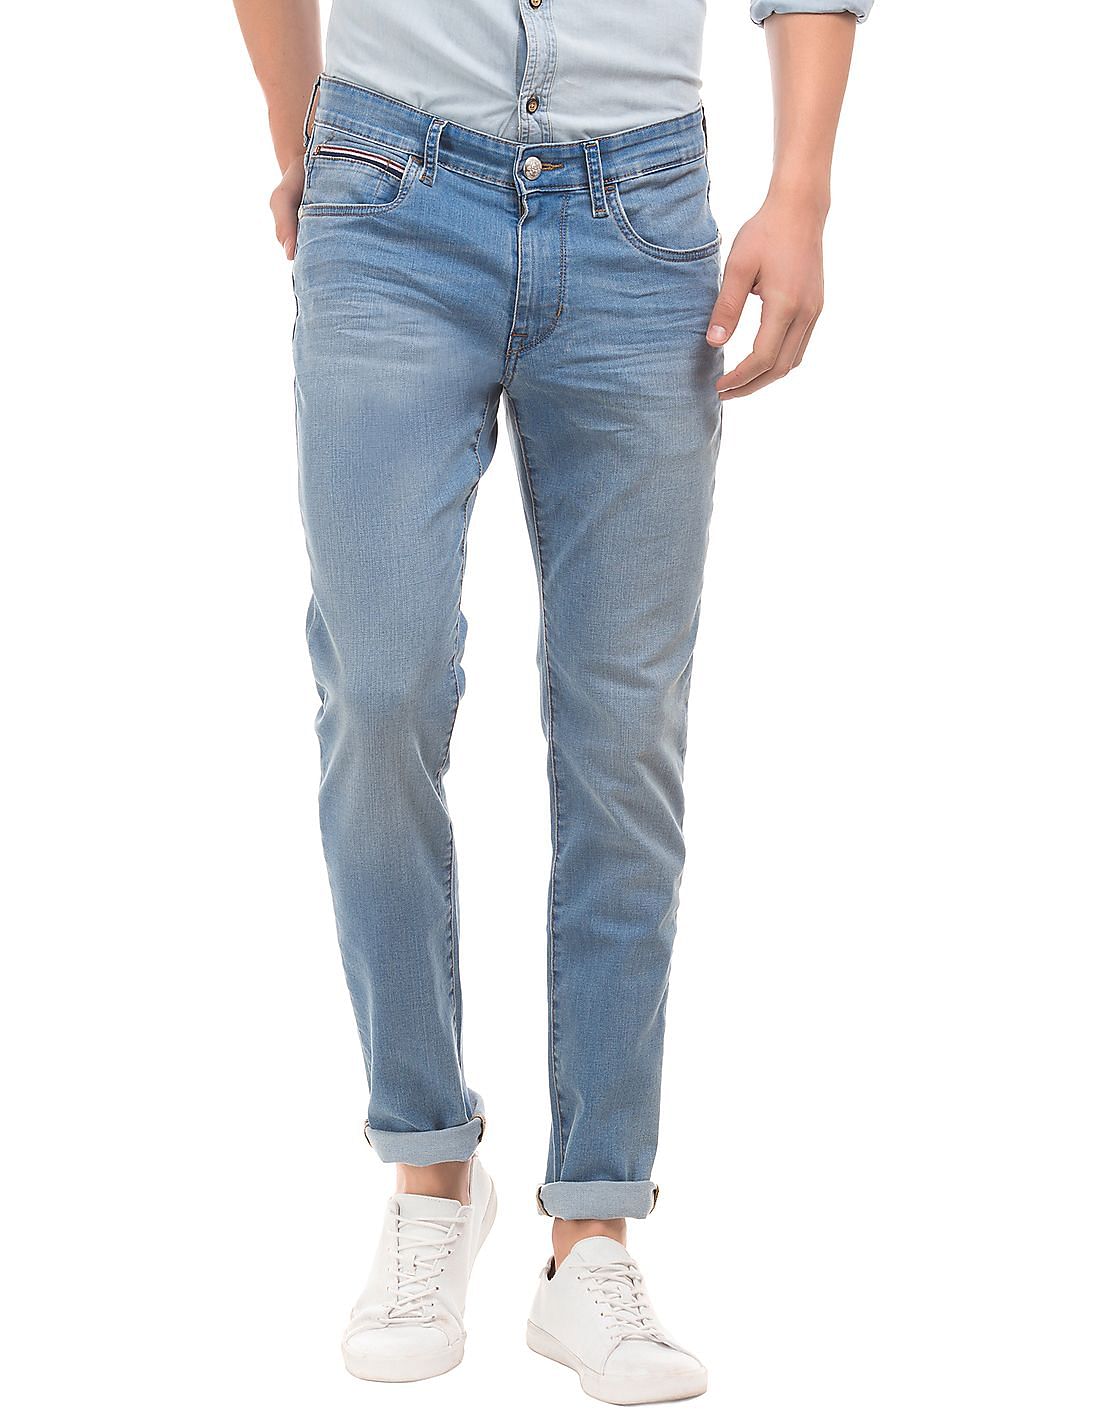 Buy U.S. Polo Assn. Denim Co. Men Washed Slim Tapered Jeans - NNNOW.com